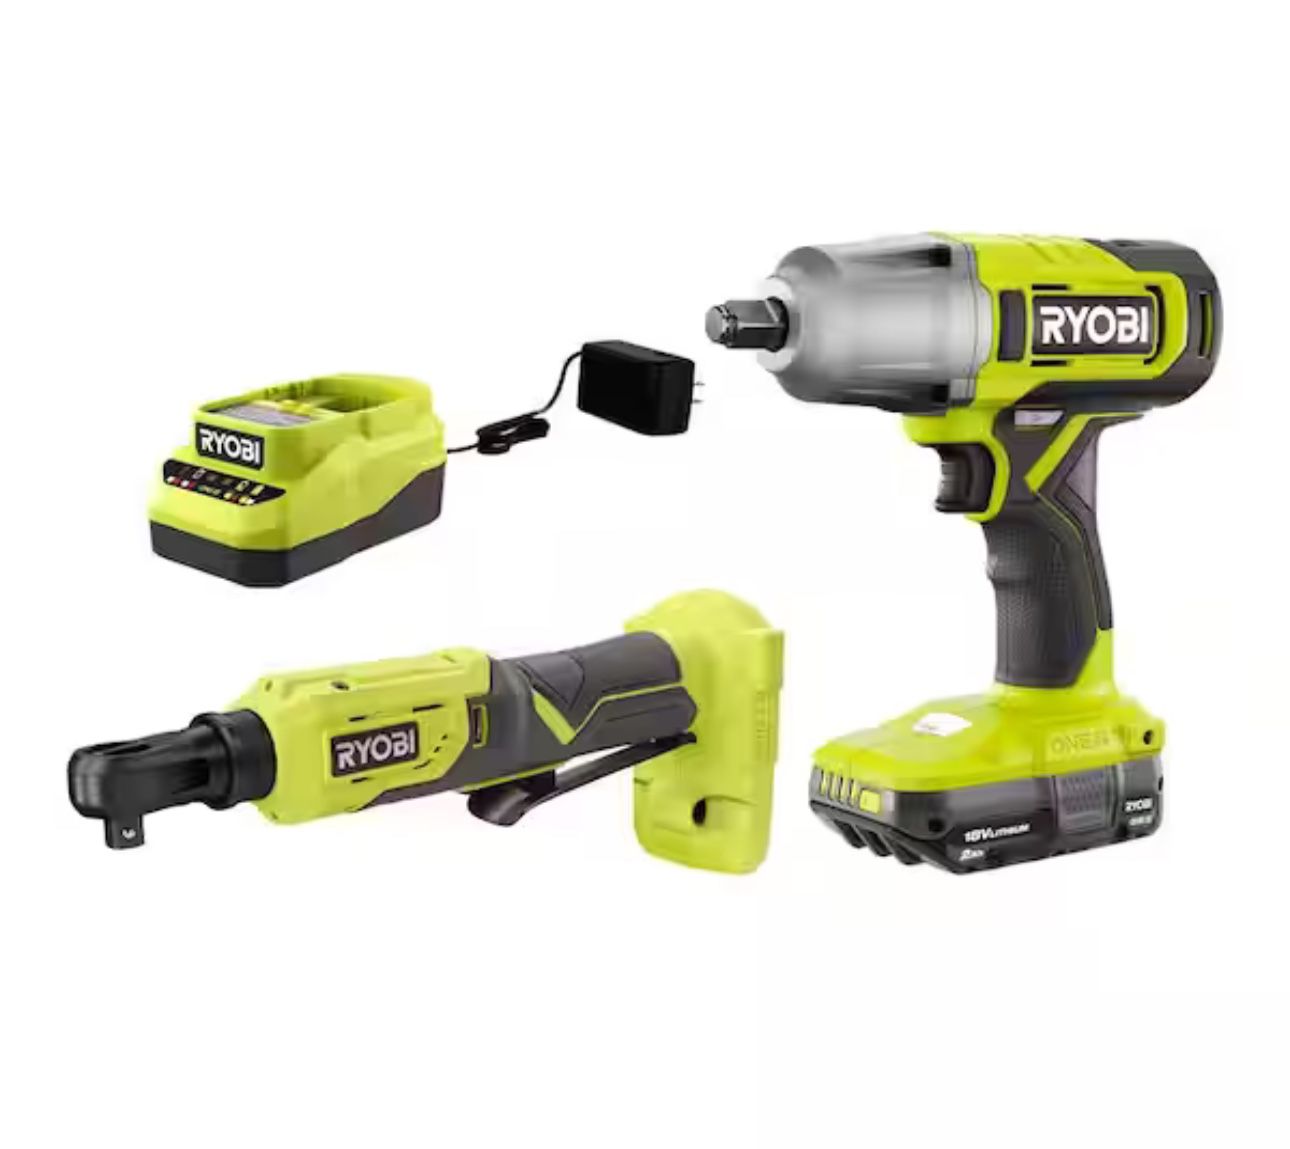  1/2 in. Impact Wrench, 3/8 in. 4-Position Ratchet, 2.0 Ah Battery and Charger